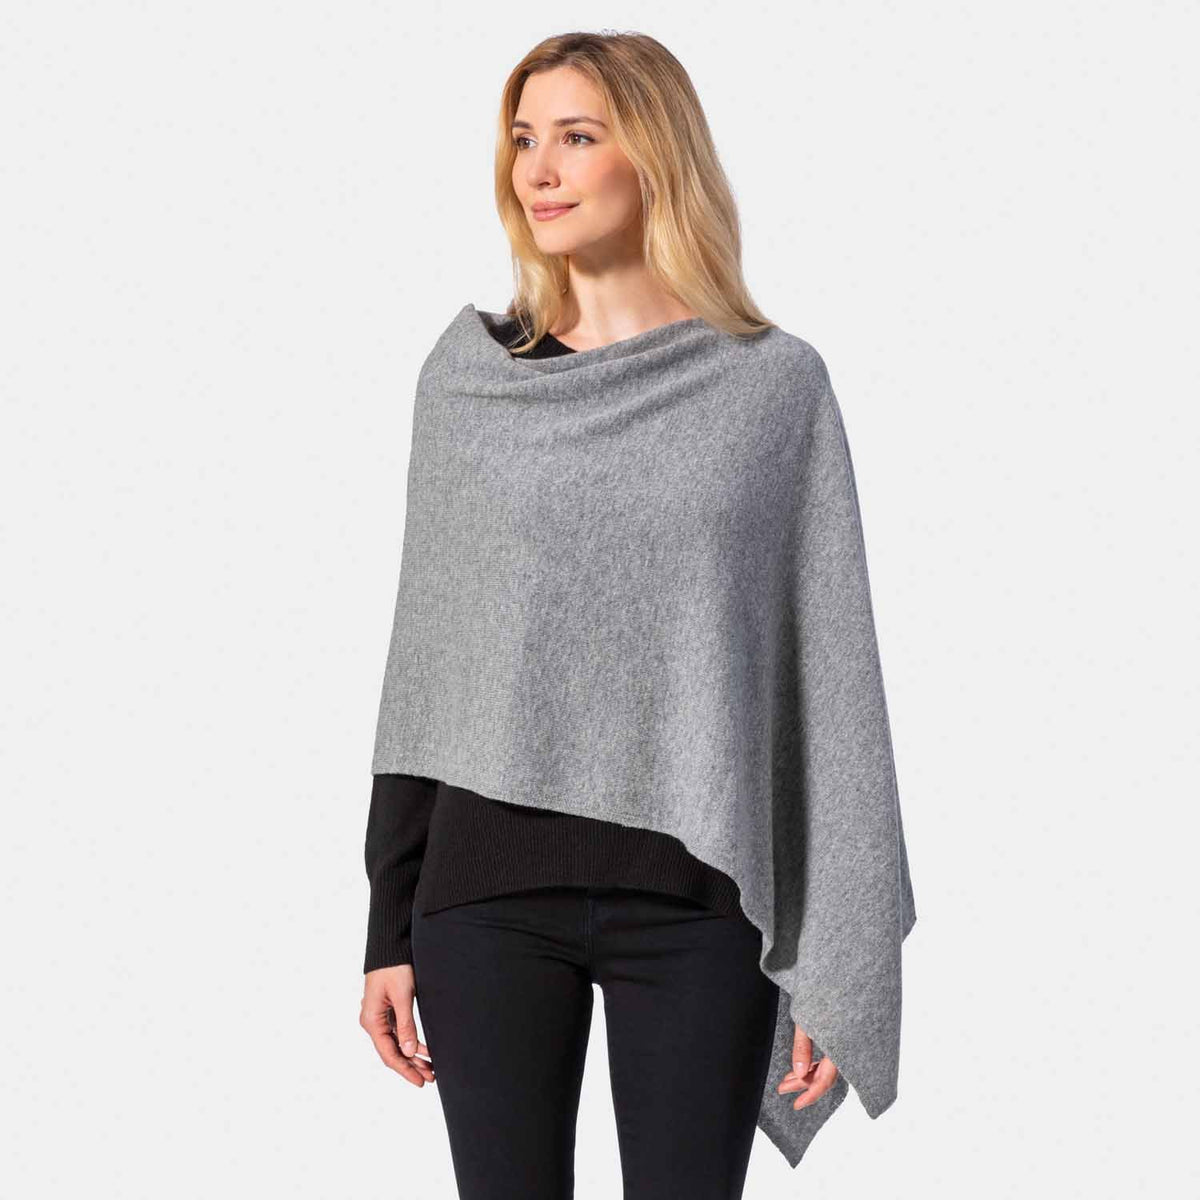 Picture of a woman wearing an asymmetrical ove the head poncho, camel.